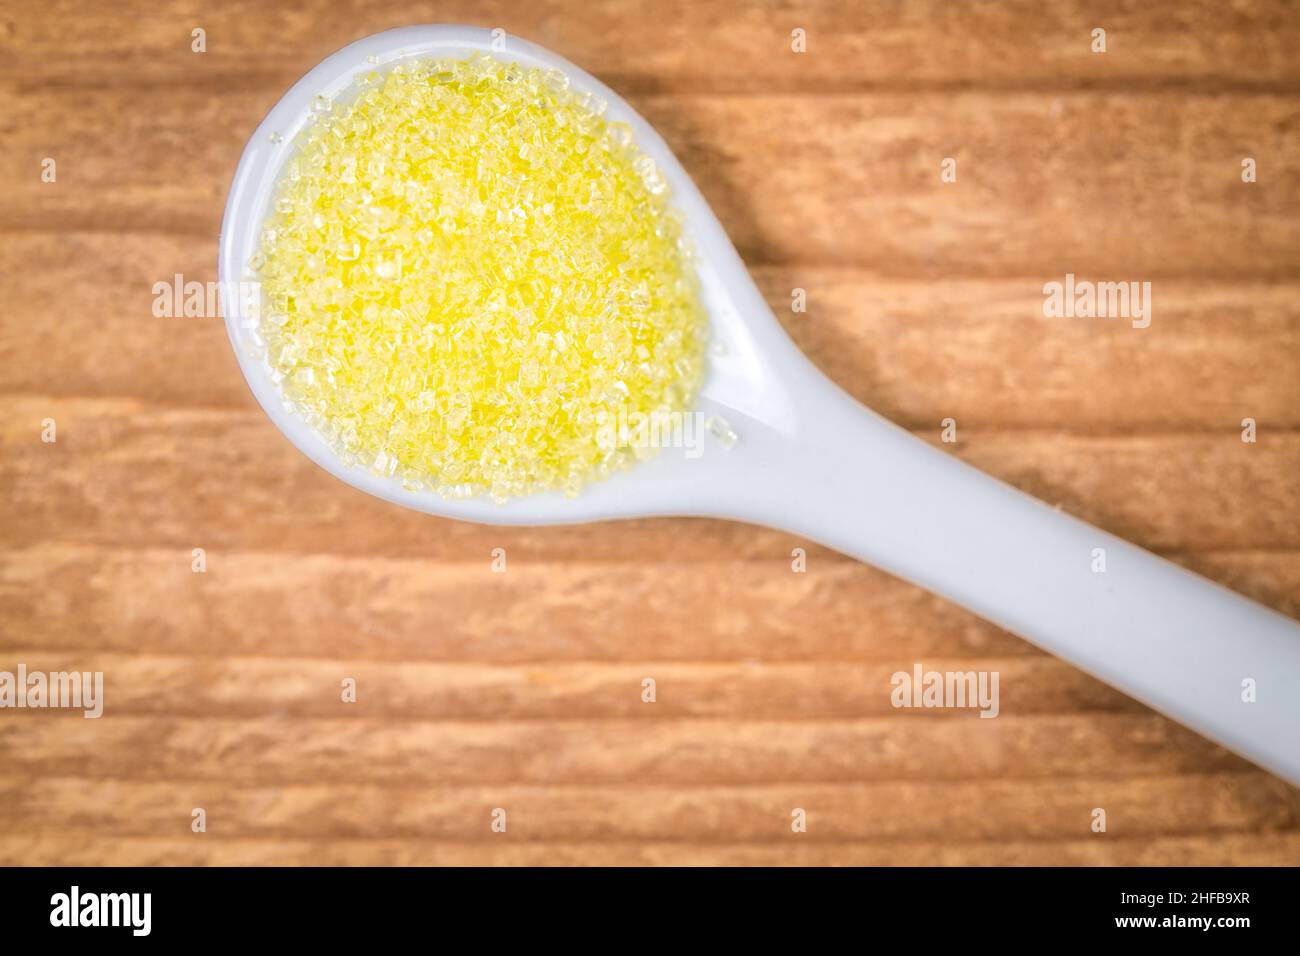 Confectionary yellow sugar in a white spoon Stock Photo